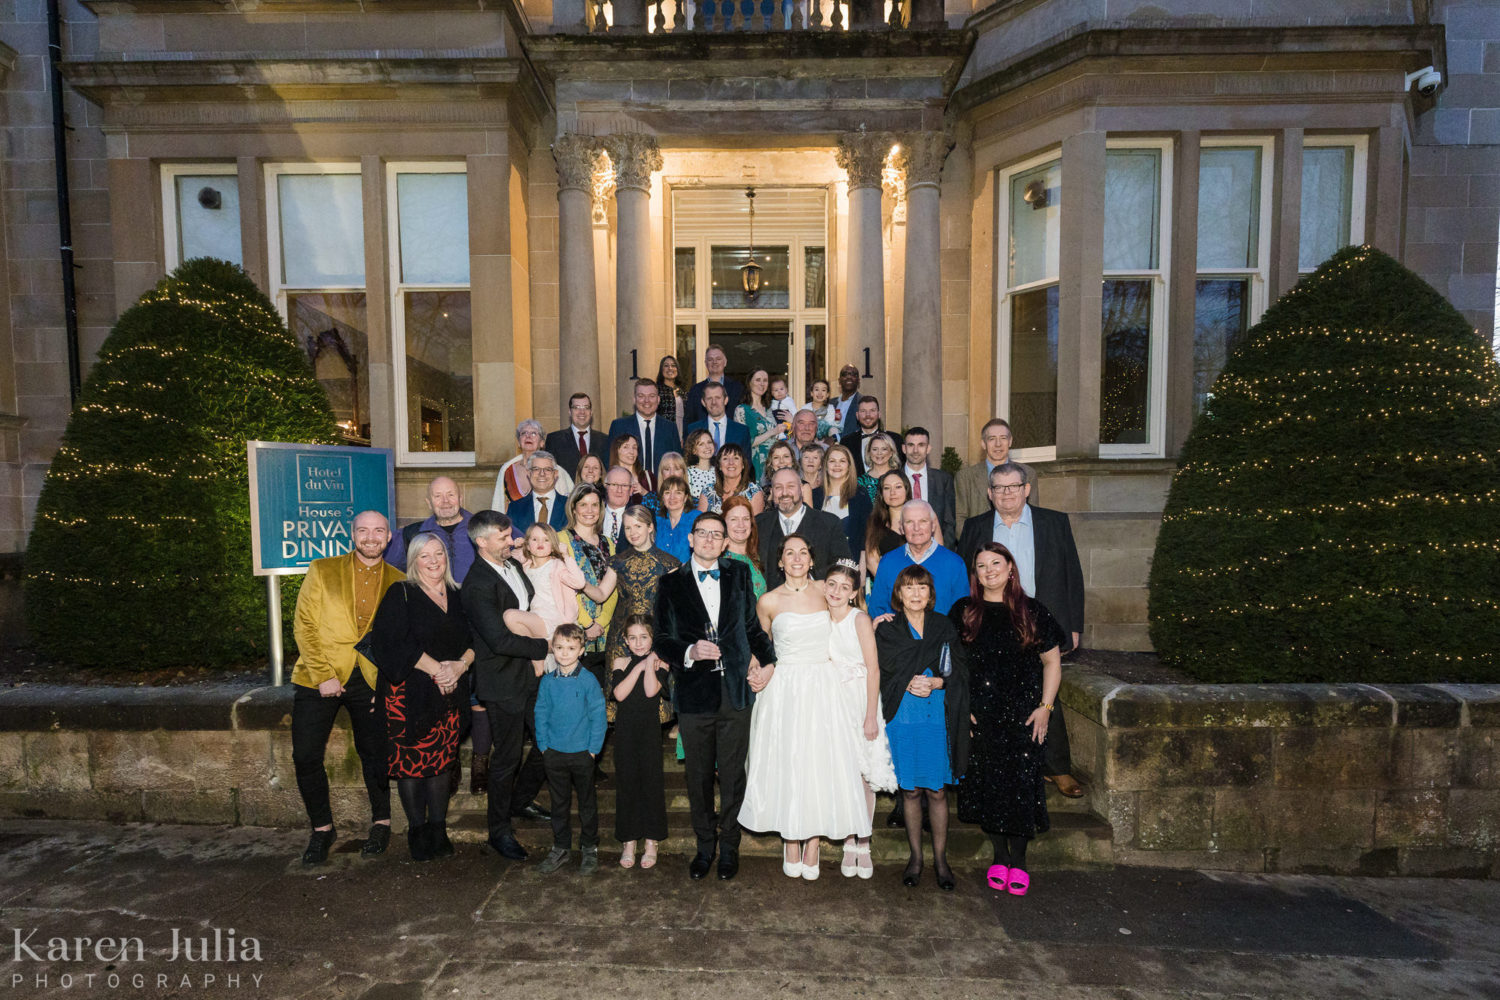 group photo of everyone on the stairs outside One Devonshire Gardens